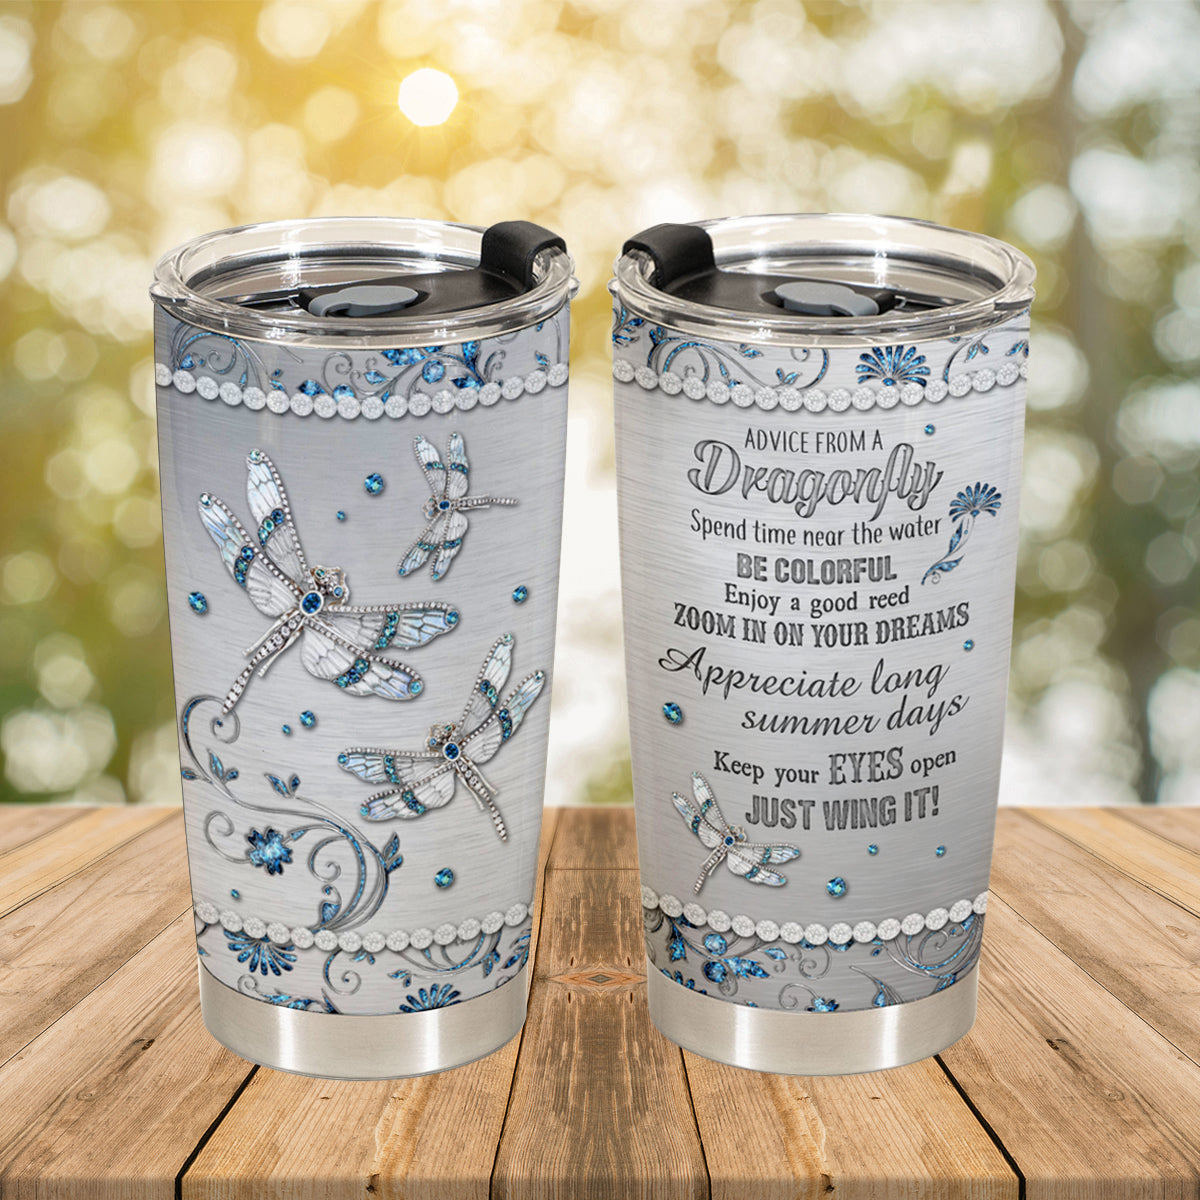 Best Custom Dragonfly Gift for Women - Boho Gifts for Women With Positive Inspirational Quote - Motivational, Religious, Spiritual, Inspirational 20oz Stainless Steel Tumbler Gifts for Women + 1666689595621.jpg